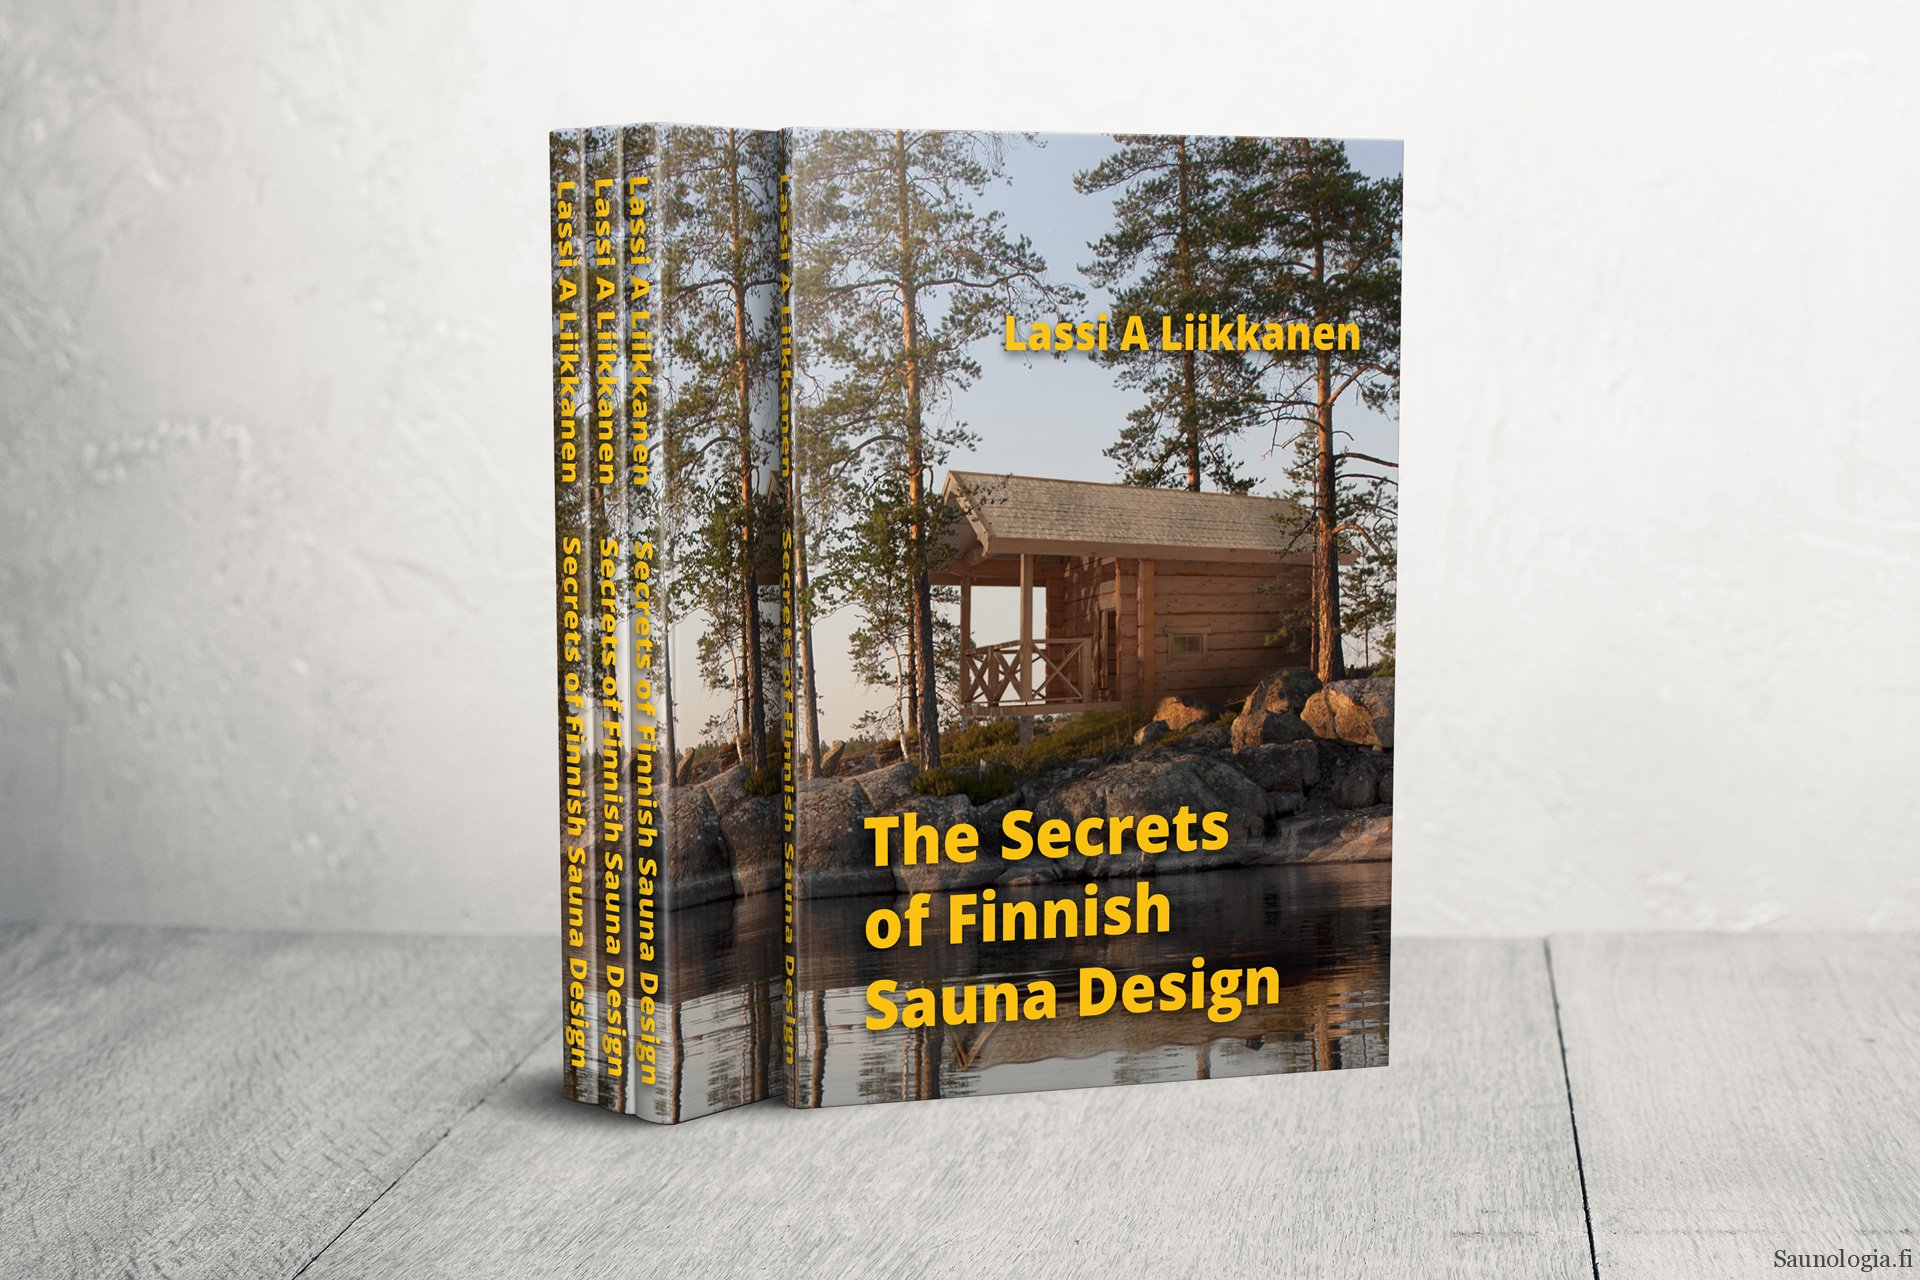 The Secrets of Finnish Sauna Design is out!